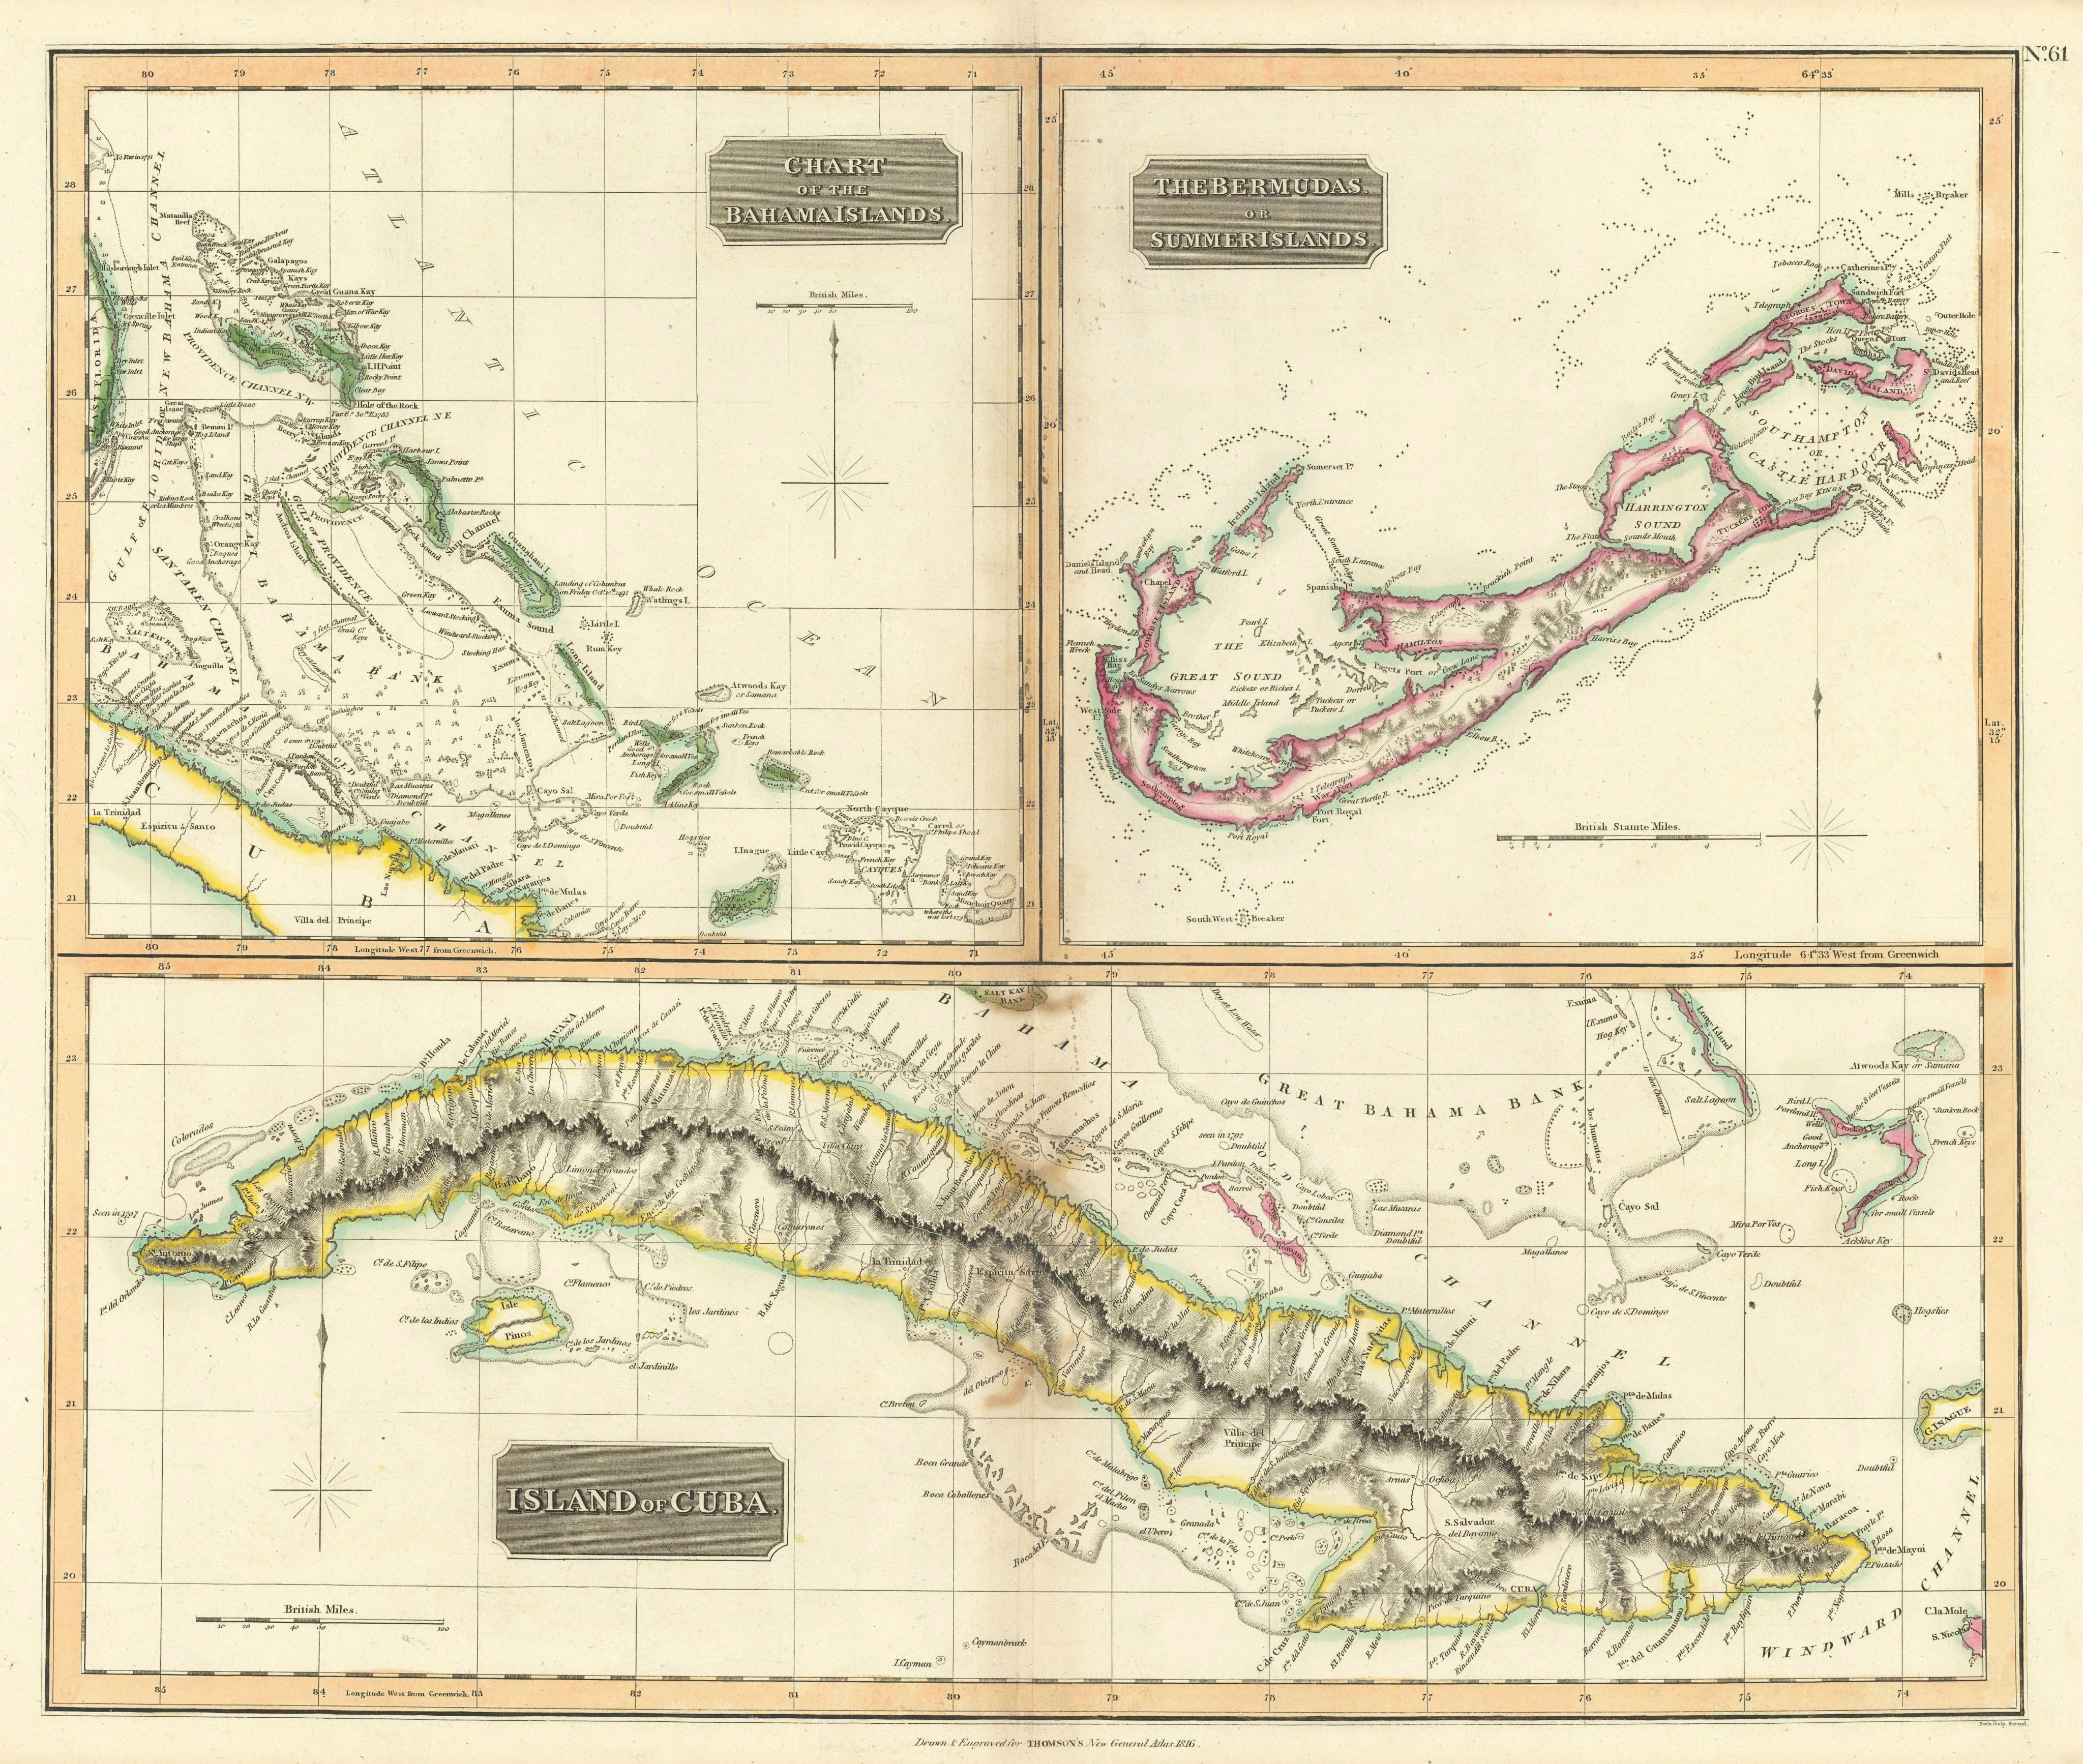 Associate Product Cuba, the Bahamas & Bermuda "or Summer Islands". THOMSON 1817 old antique map